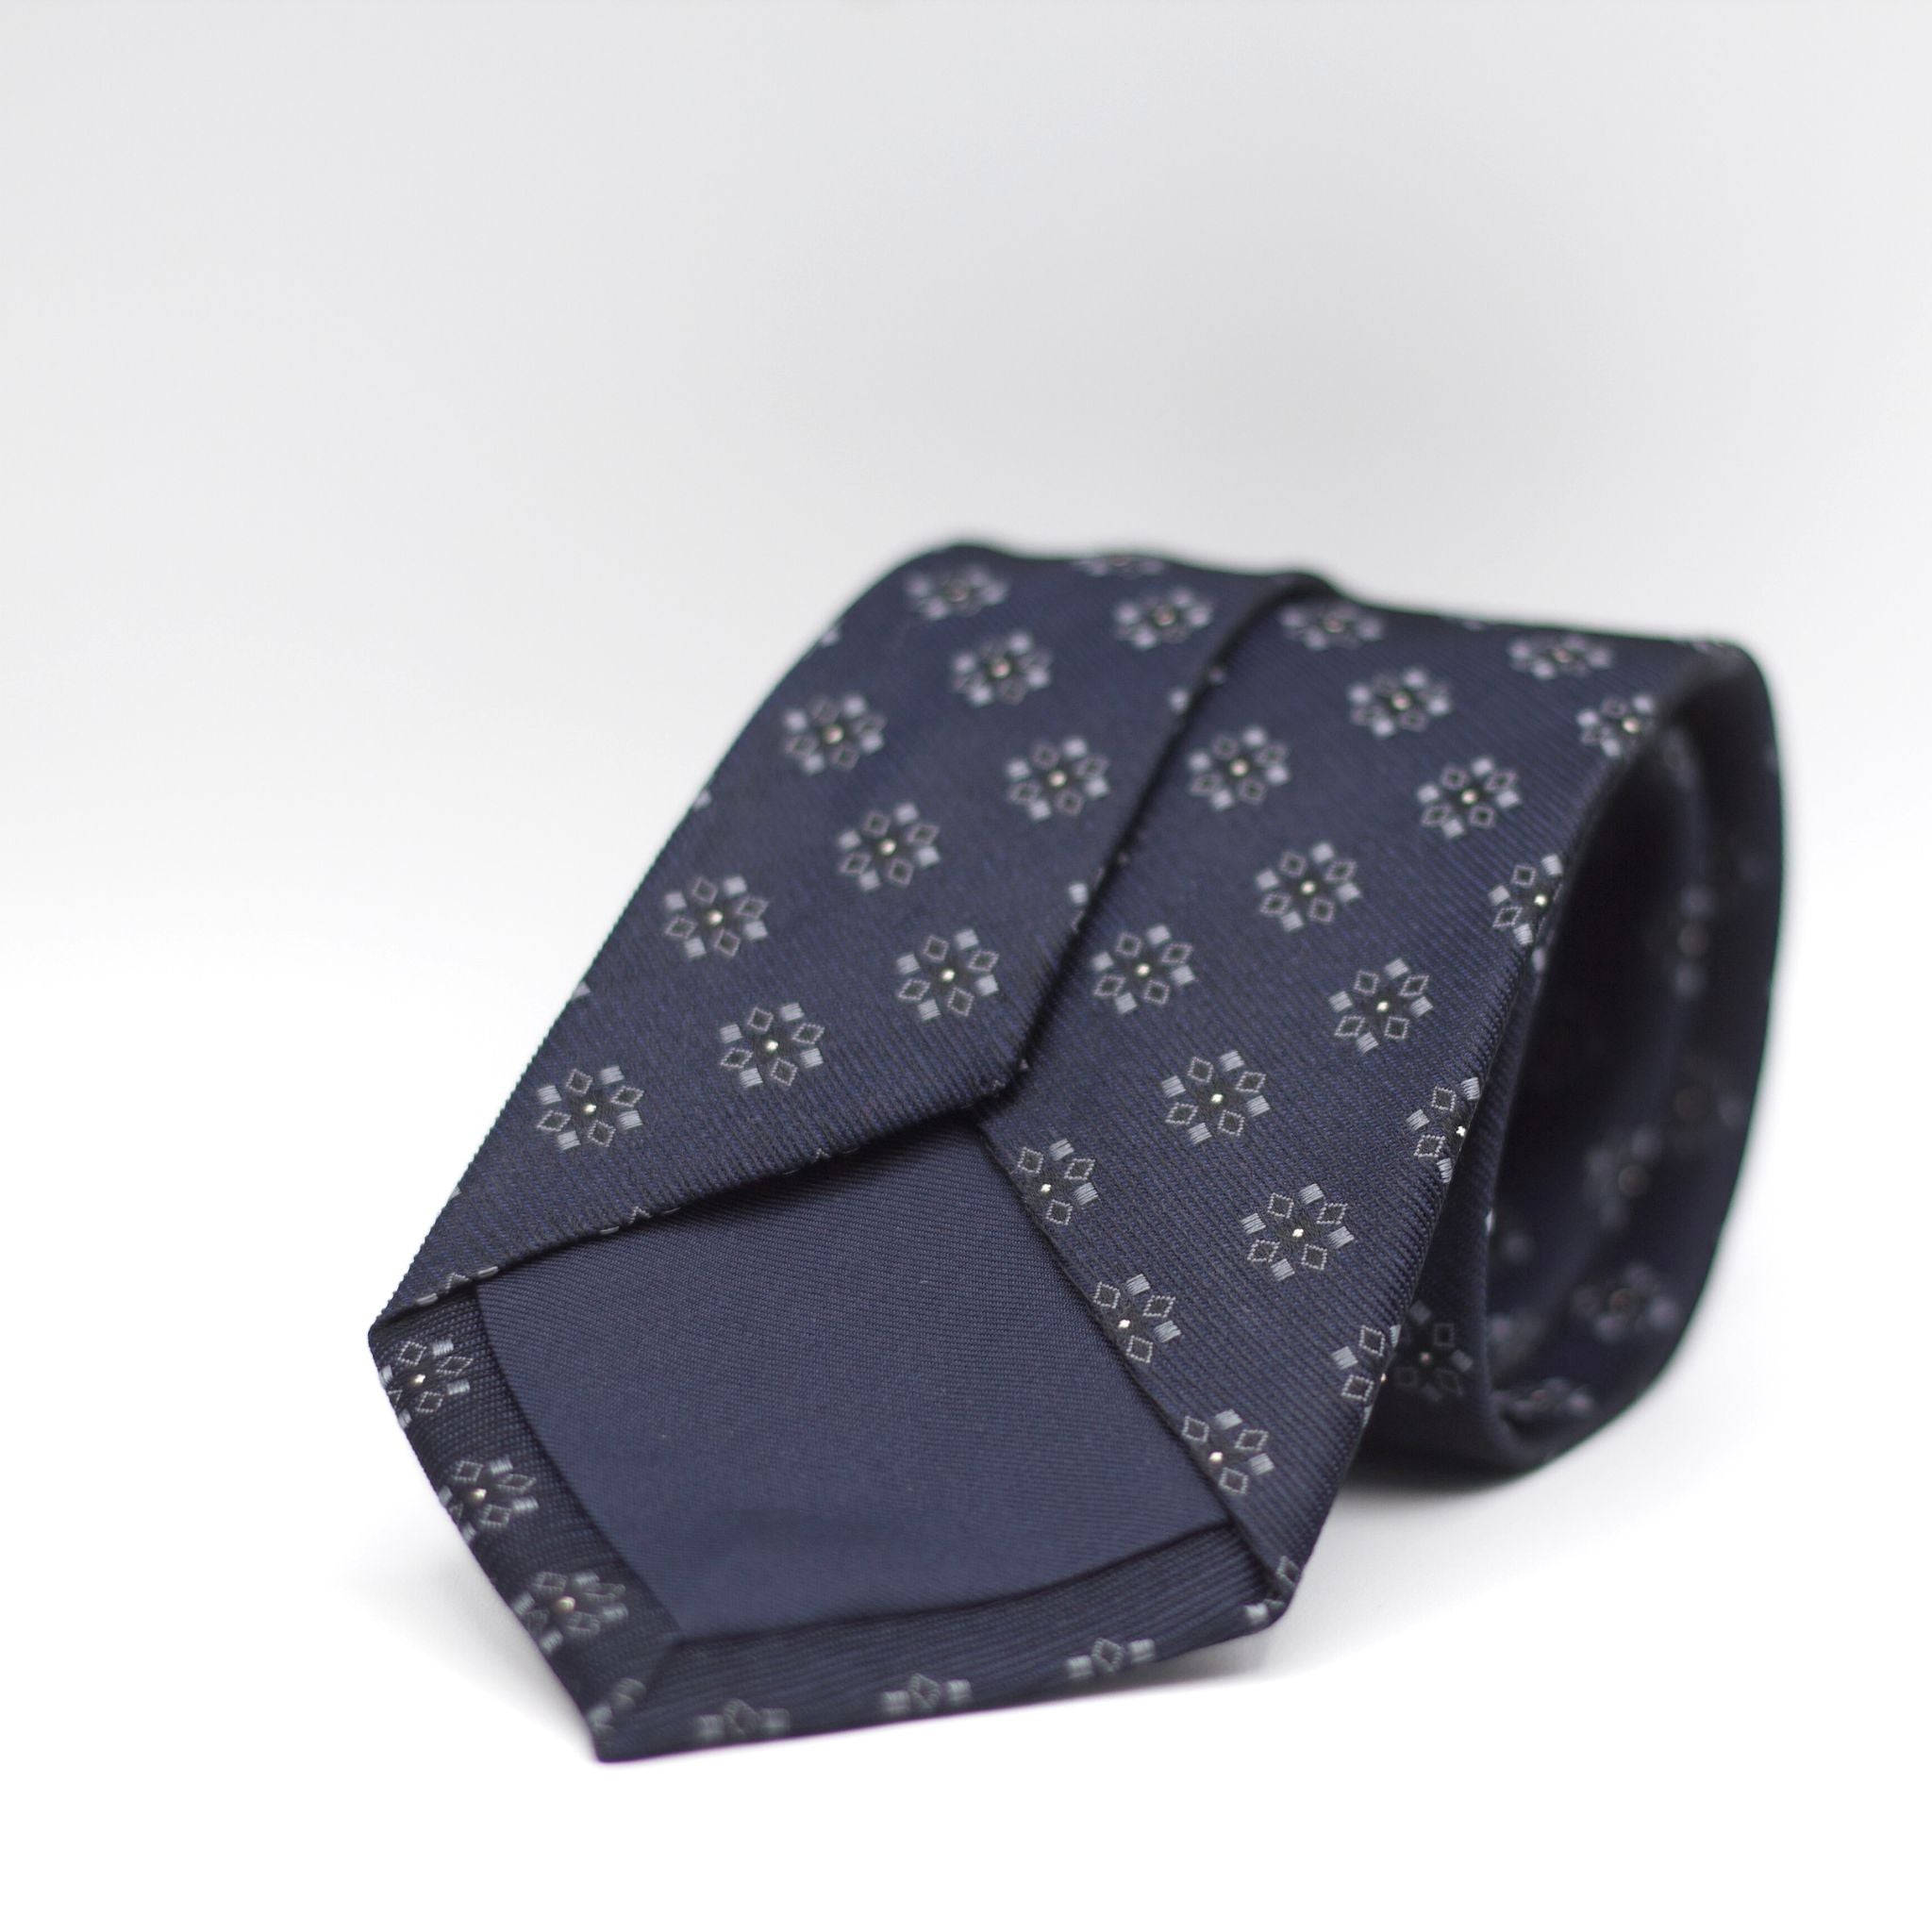 Holliday & Brown for Cruciani & Bella 100% Woven Jacquard Silk Tipped Blue, Grey, Black  and White  motif tie Handmade in Italy 8 cm x 150 cm